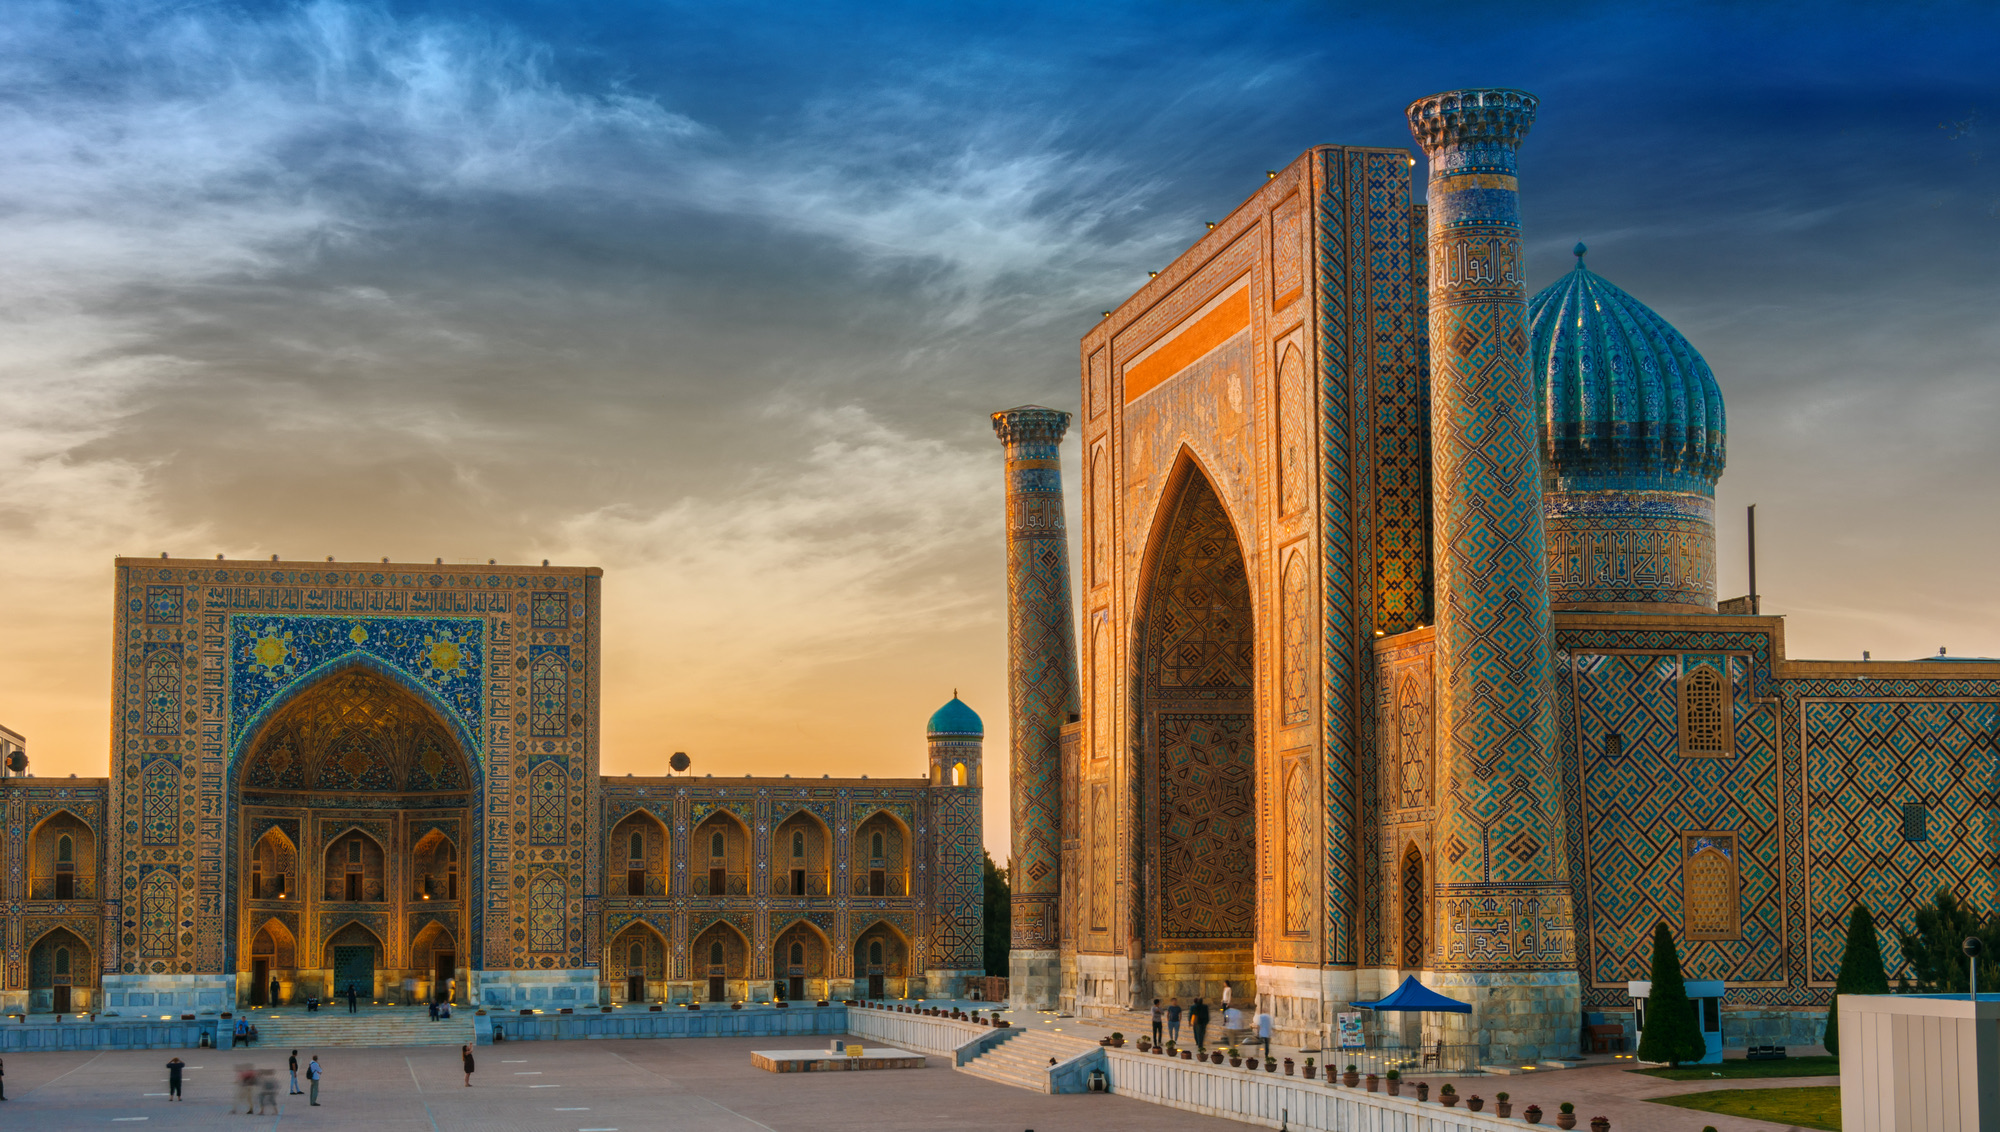 Located in Central Asia, Uzbekistan is another hidden gem for tourists to enjoy and relax with their families and friends. Moreover, the country has opened its gates to 39 new countries, including India, which makes the region more accessible. <p>There is a myriad of fun activities and places to visit in Uzbekistan, like the Uzbek Ceramic Experience, exploring old Mohallas of Tashkent and Chorsu bazaar, walking relaxing alleys and visiting the silk-carpet workshop of Khiva, visiting the Jewish Bukhara, etc.</p>